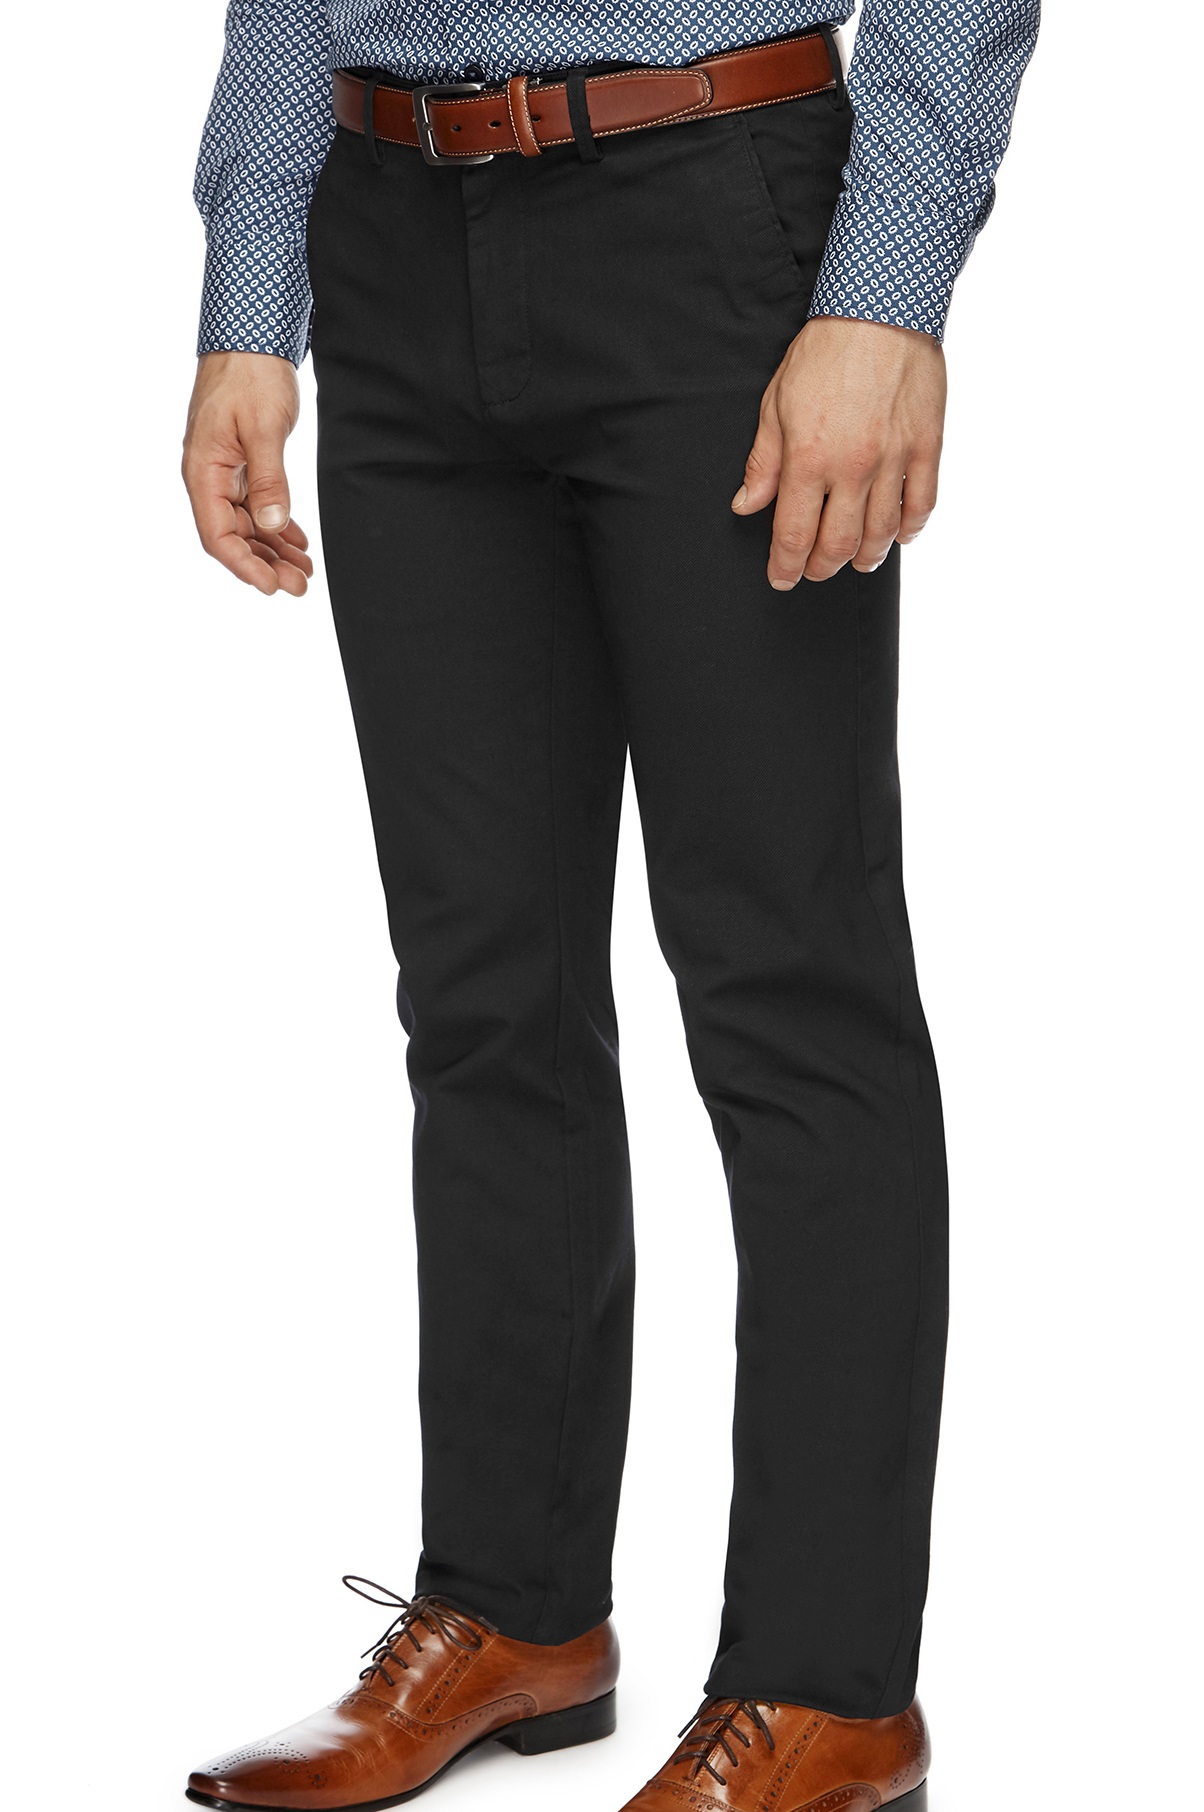 City Club Mens Chino Pant Cotton Stretch Buy Online Free Delivery